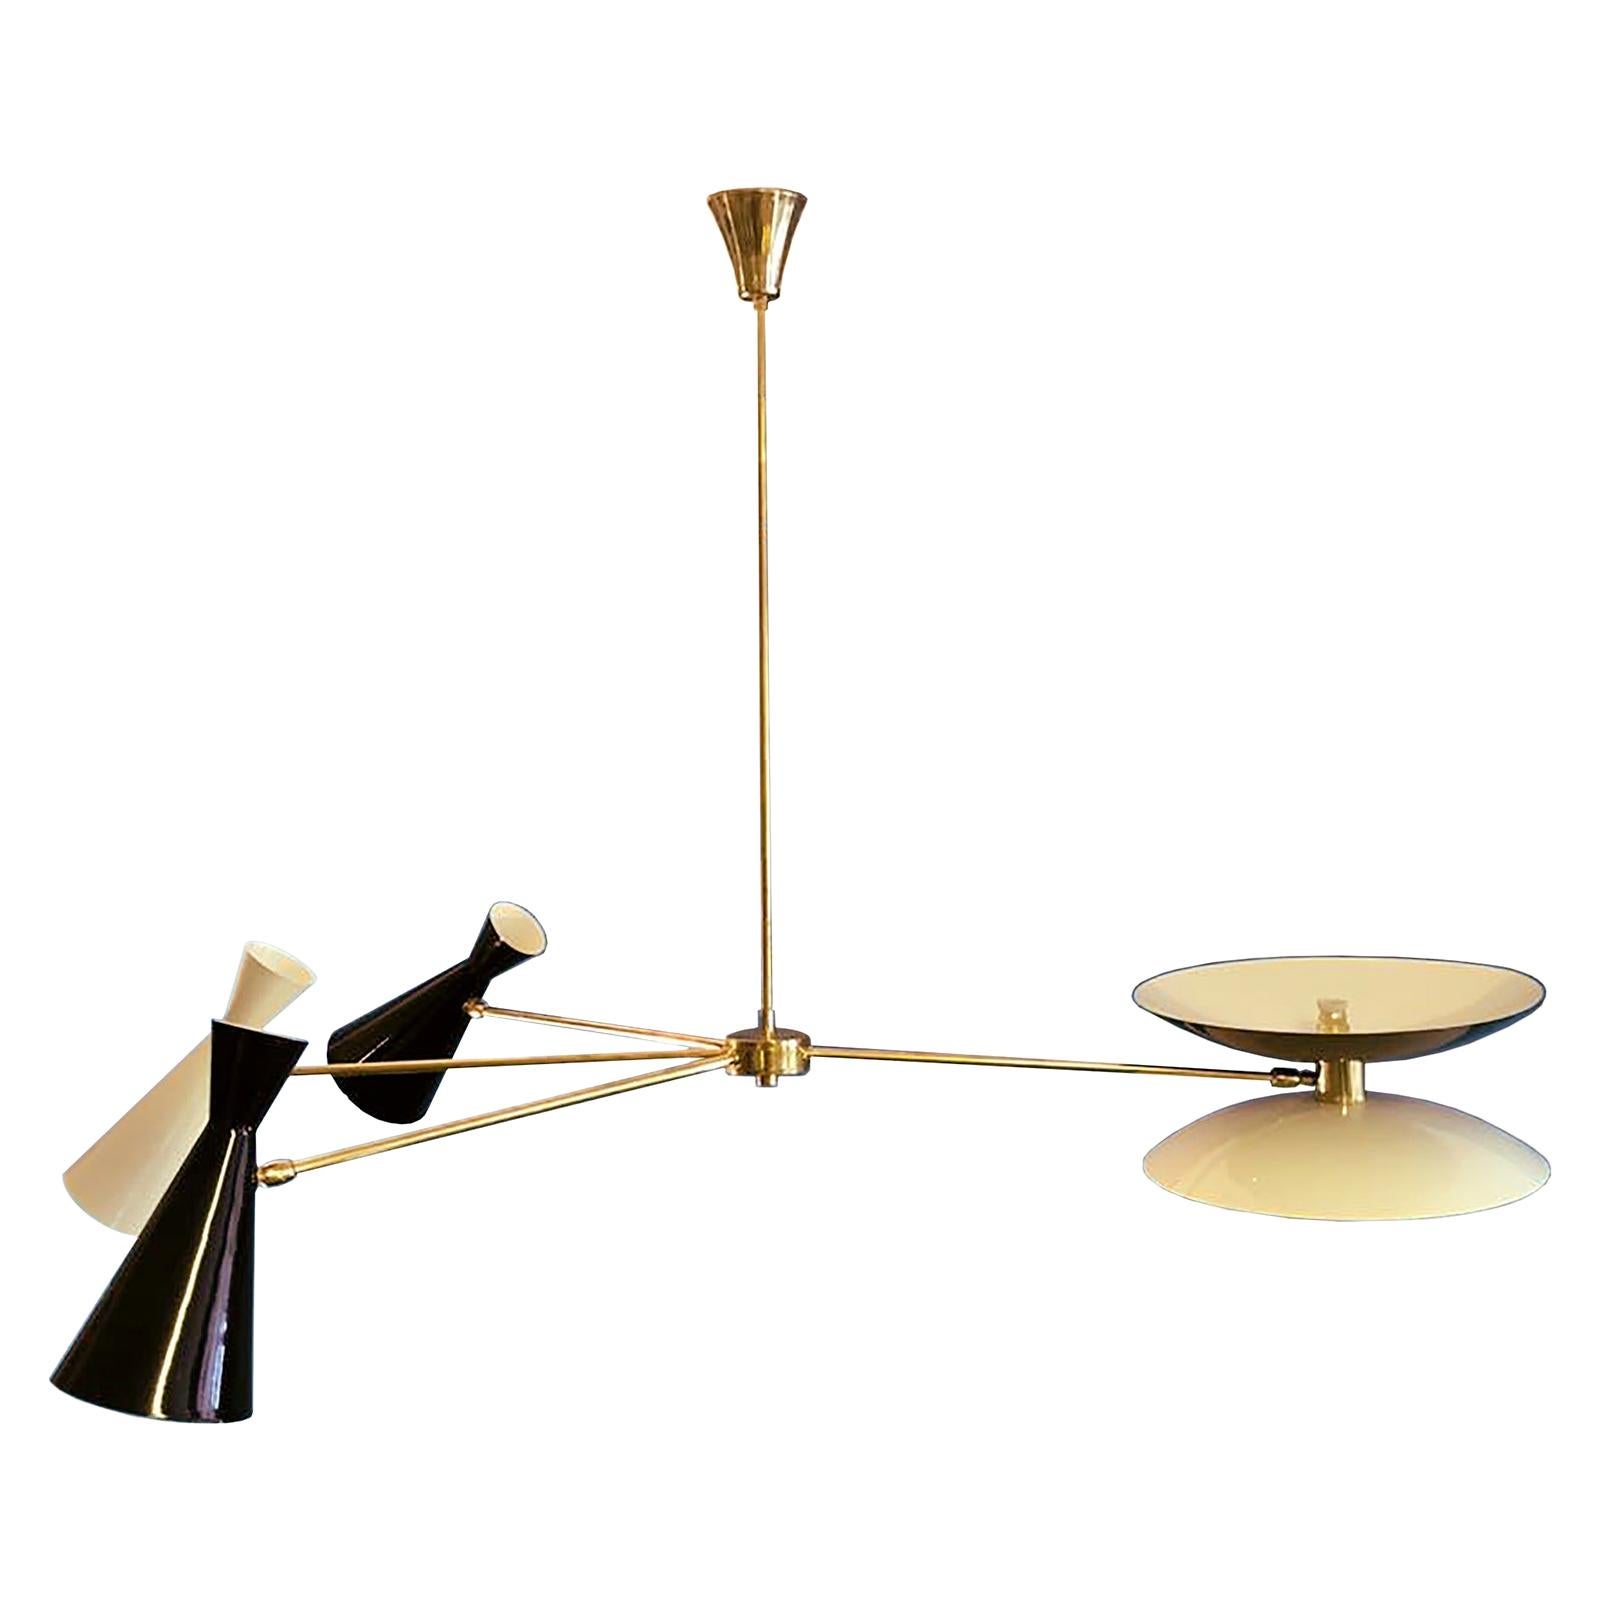 Beautiful asymmetrical Italian chandelier, four adjustable arms disposed one and three in opposition to create a geometric counterbalanced flair. Made of brass and lacquered aluminum in shades of pink, dark red, and oil blue.

It can be customized